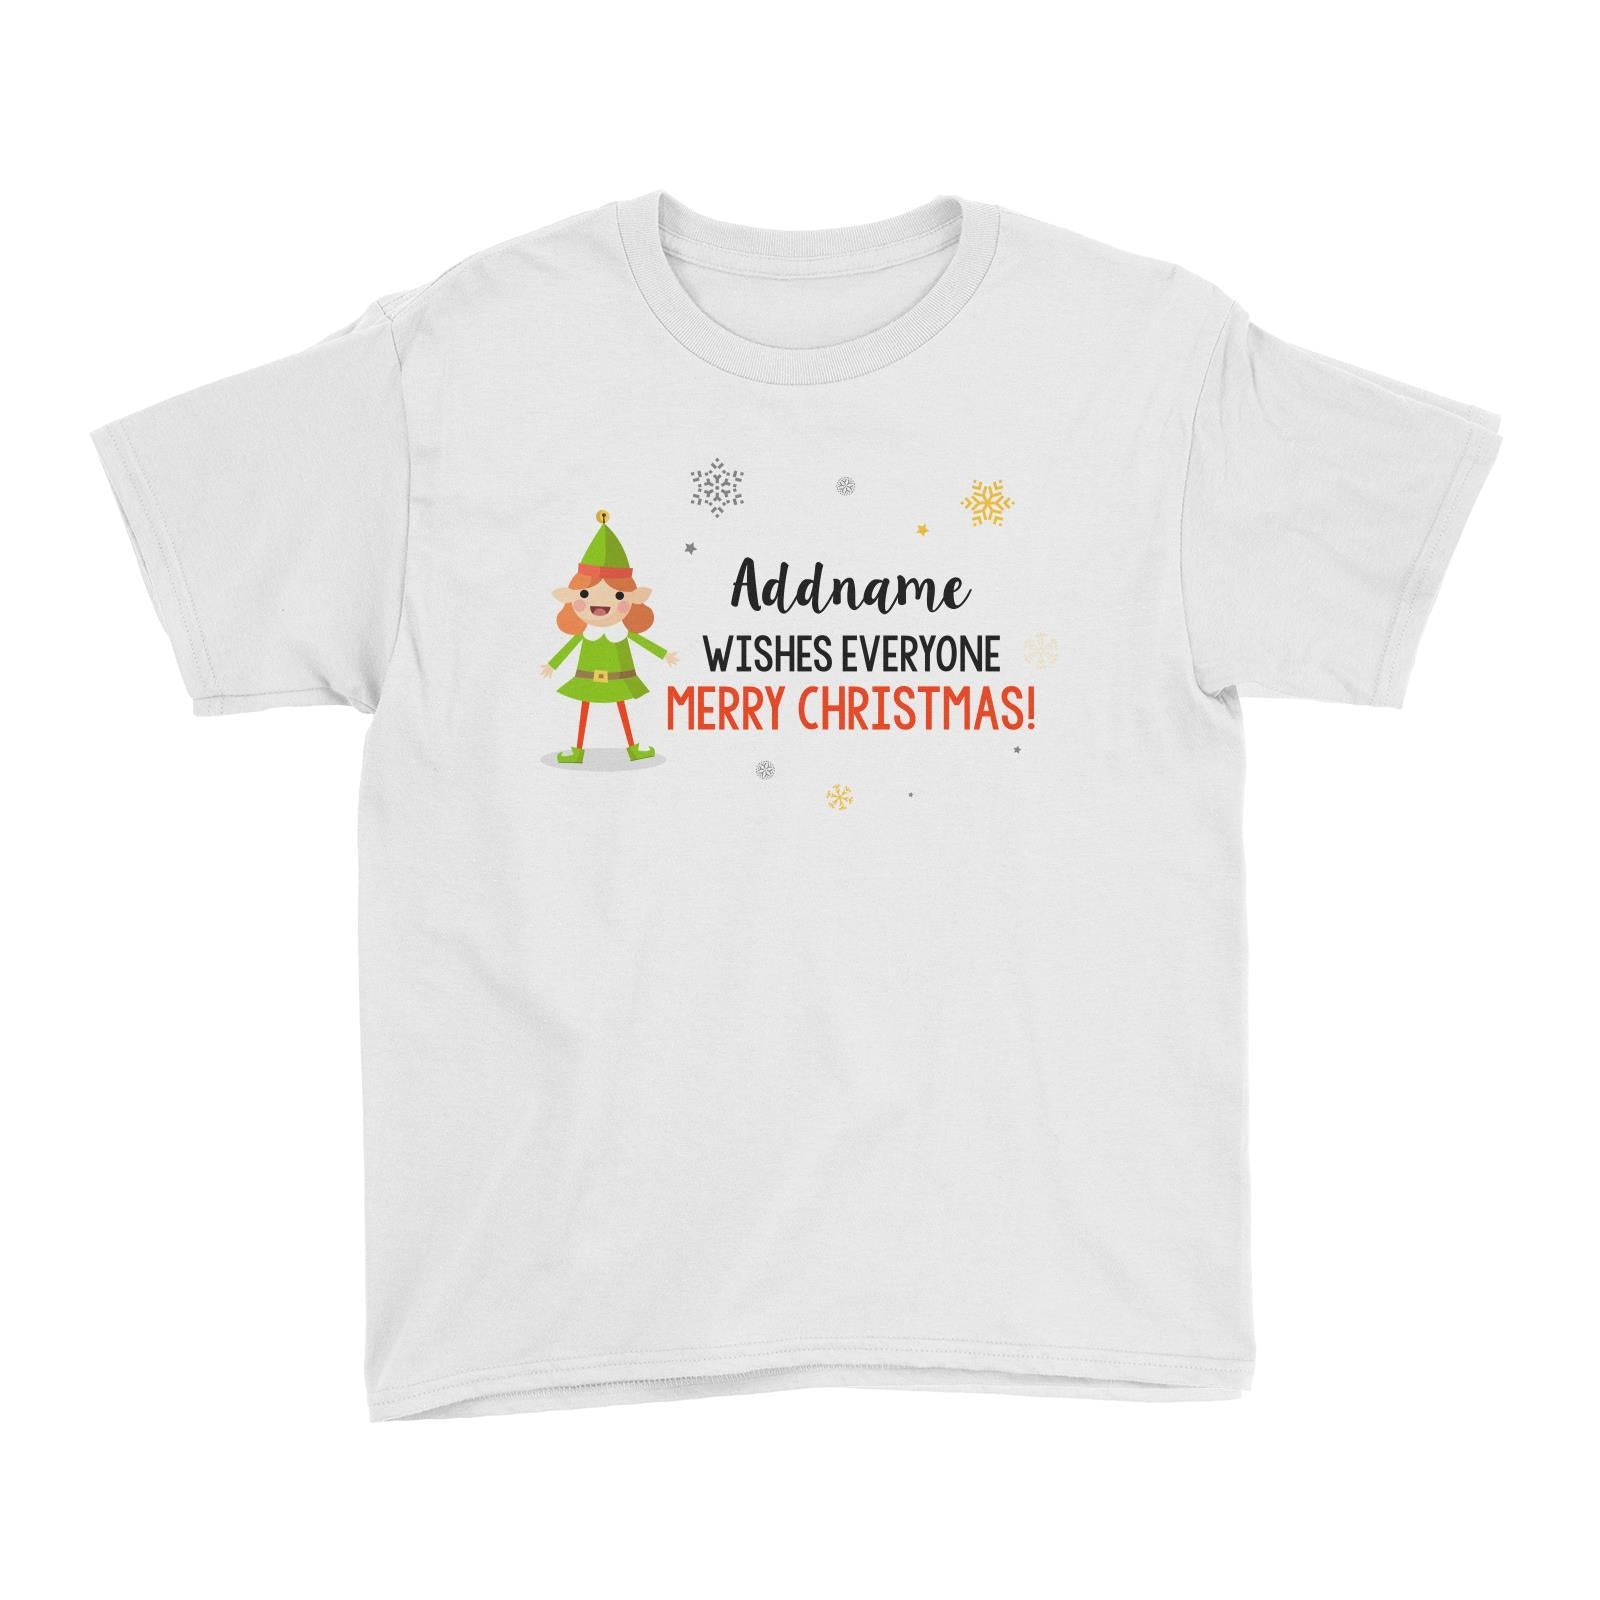 Cute Elf Girl Wishes Evryone Merry Christmas Addname Kid's T-Shirt  Matching Family Personalizable Designs